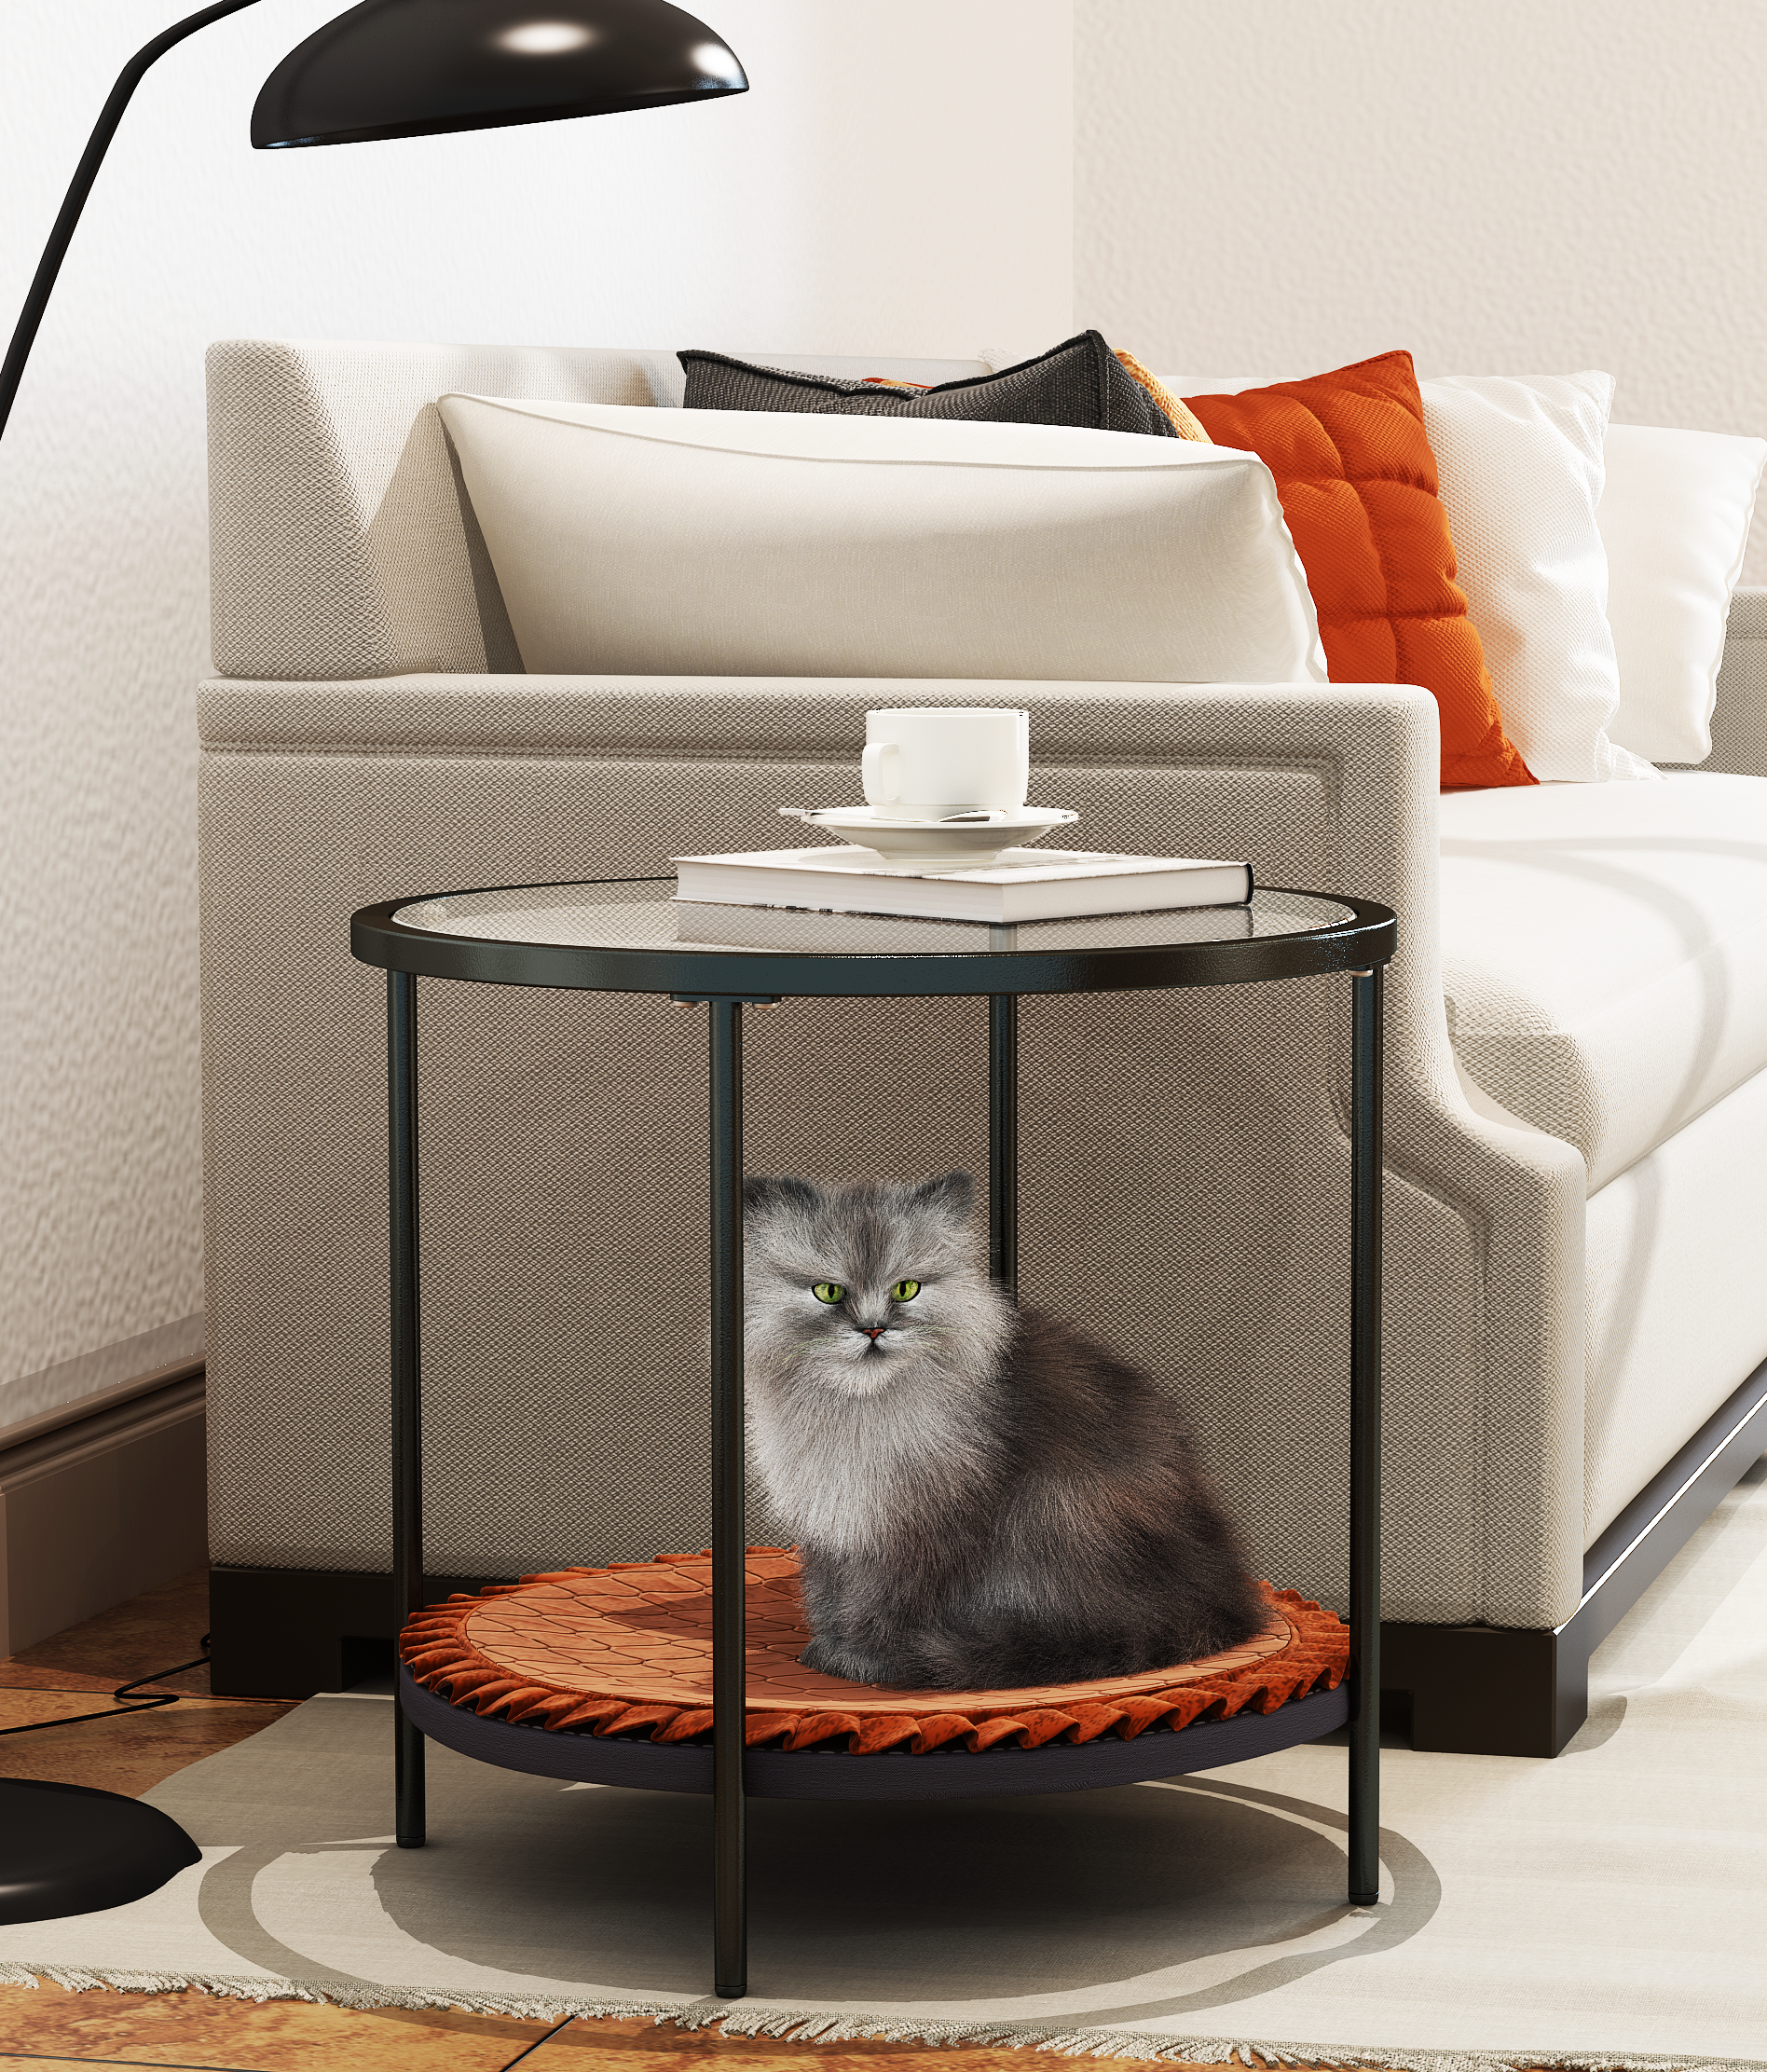 coffee table share with pets（Provide pet mat）, Net cloth tempered glass tabletop&nbsp;coffee table,multi-function&nbsp;easy assembly minimalist creative metal tea table,cat and dog kennel/appliance-Boyel Living